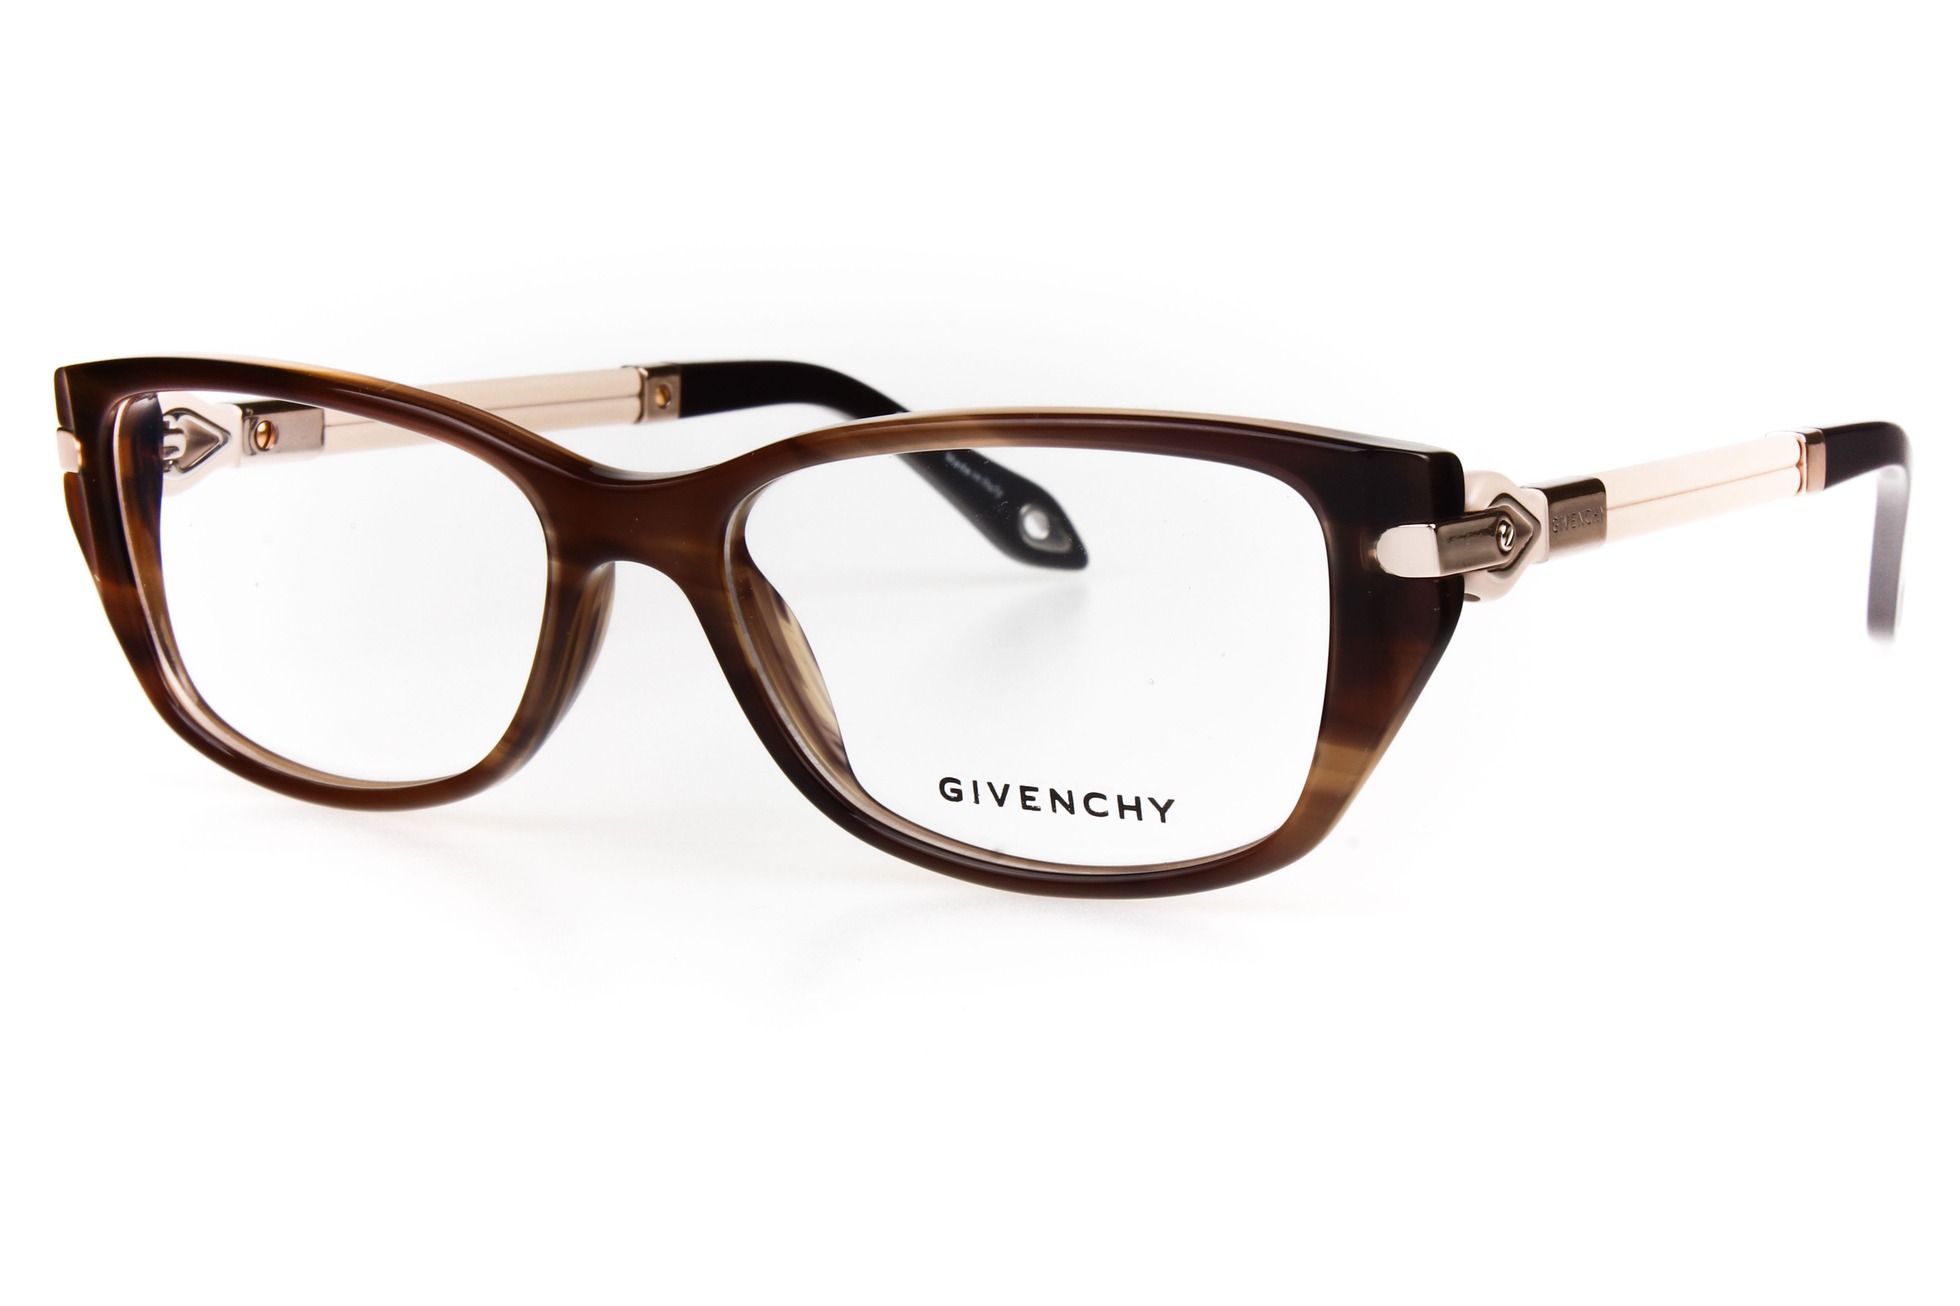 Givenchy VGV903 6YZX